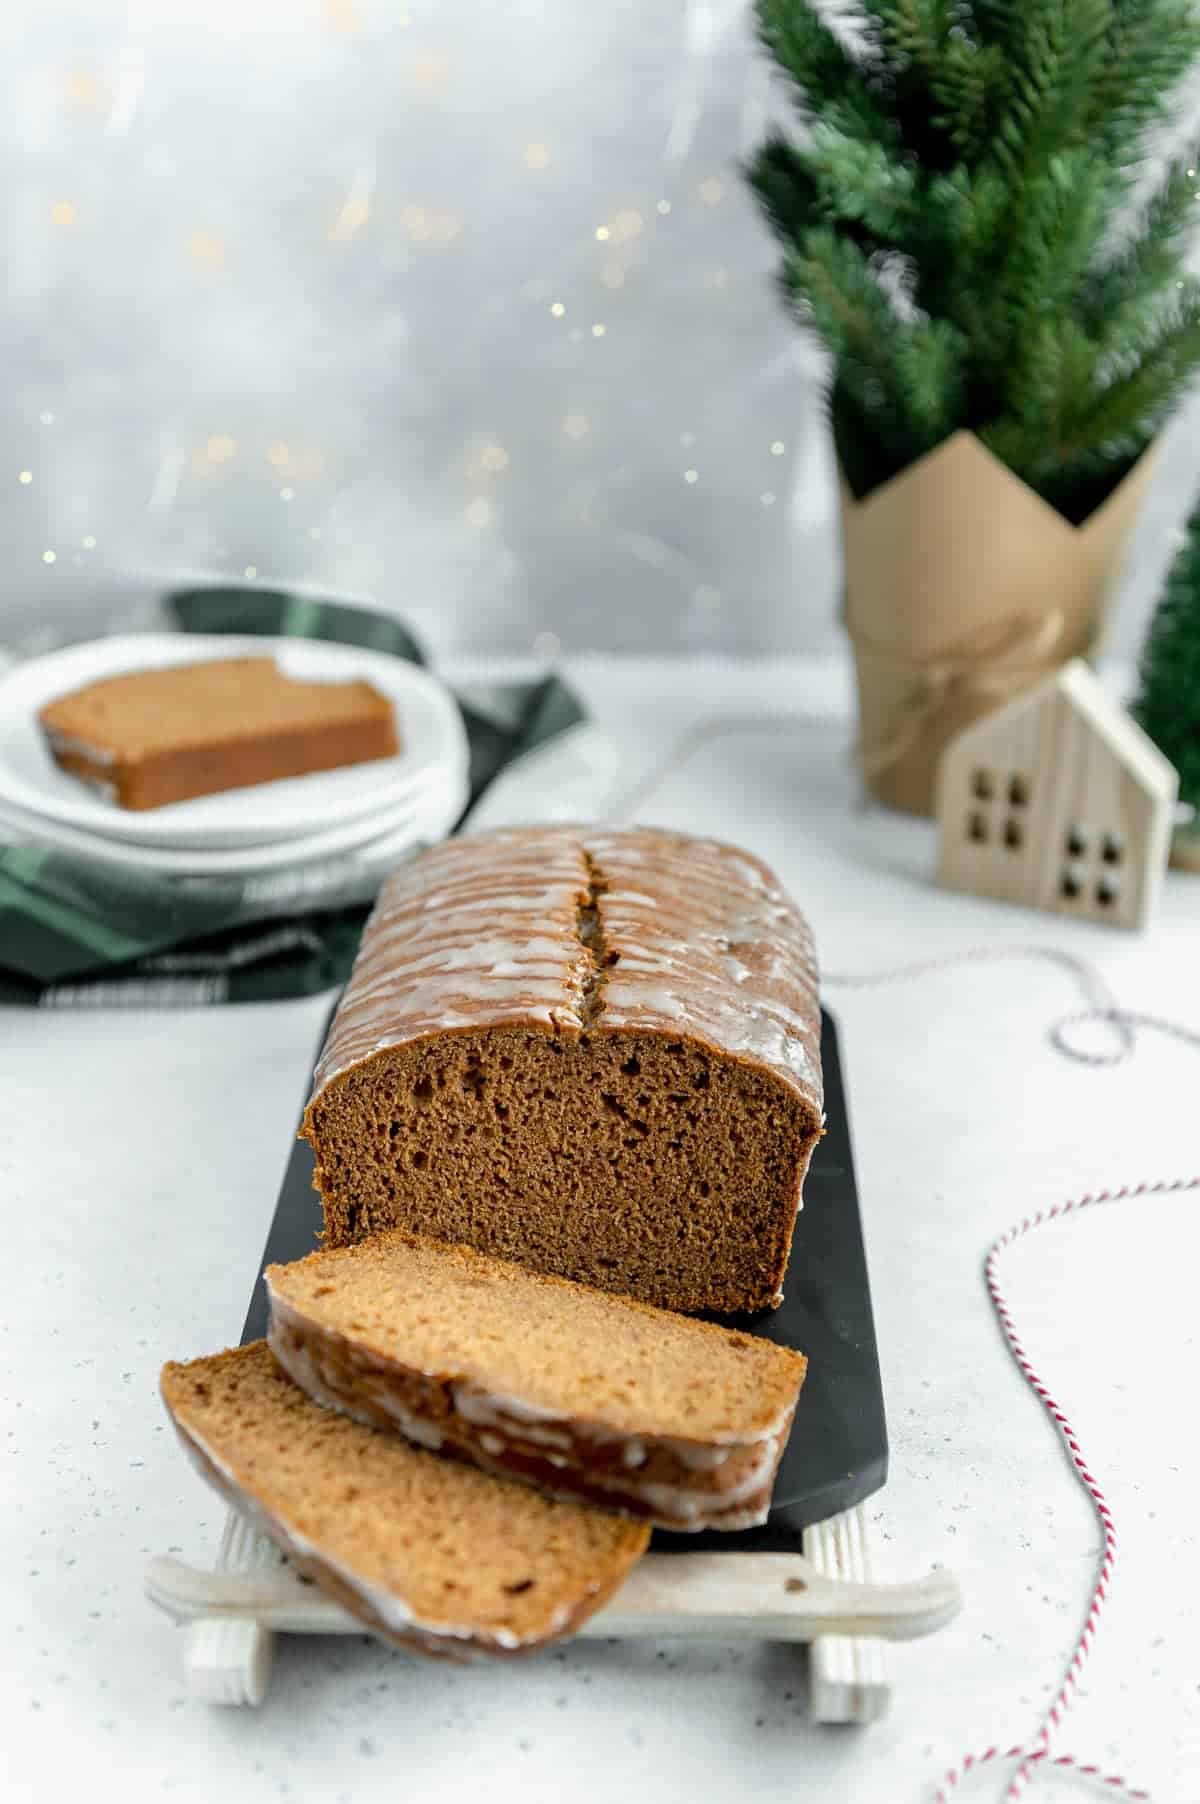 Copycat Starbucks Gingerbread Loaf Recipe - In Pursuit of Chic